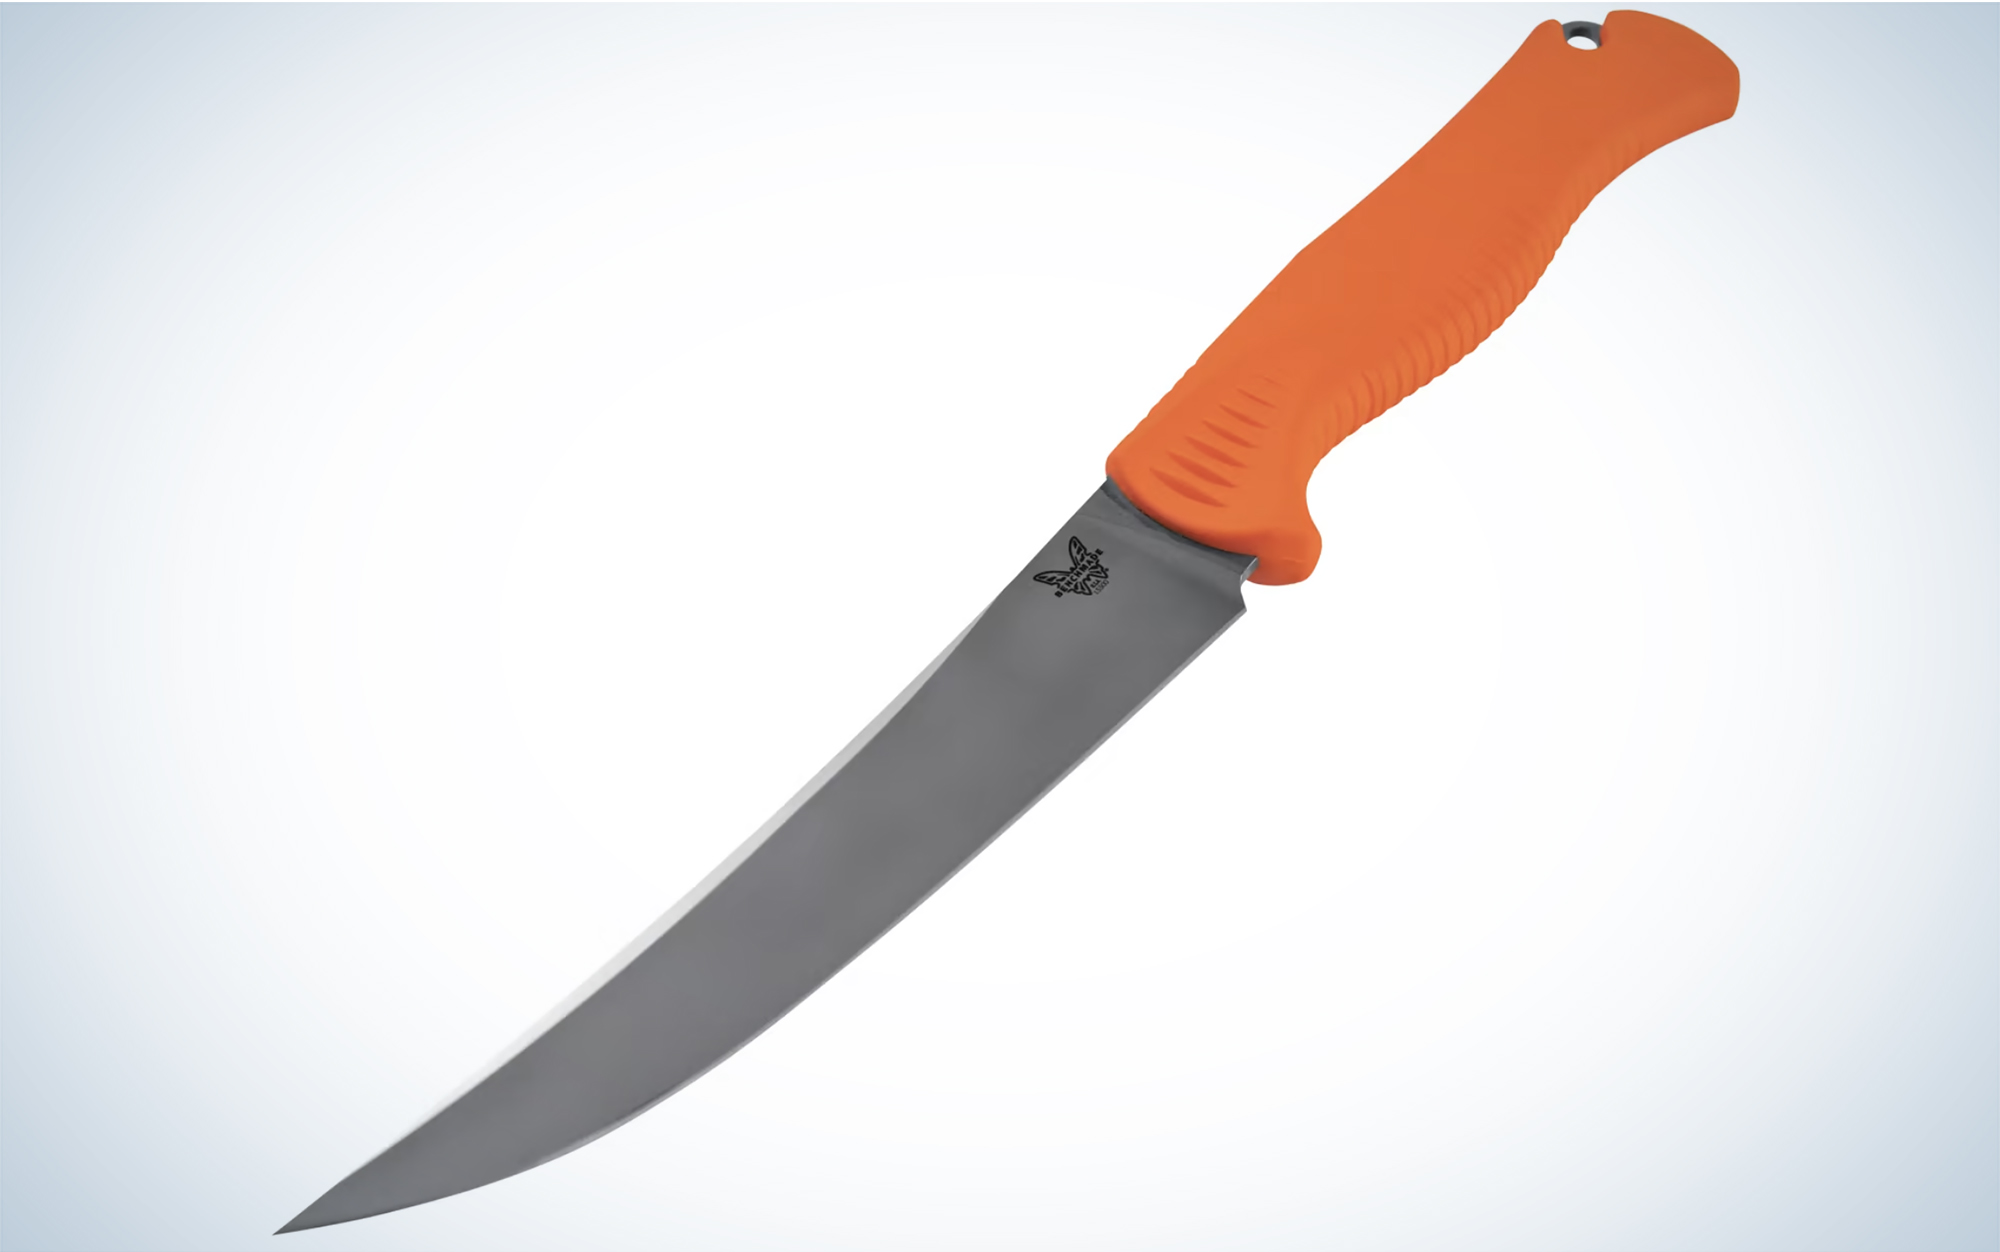 The Benchmade Meatcrafter is one of the best gifts for deer hunters.